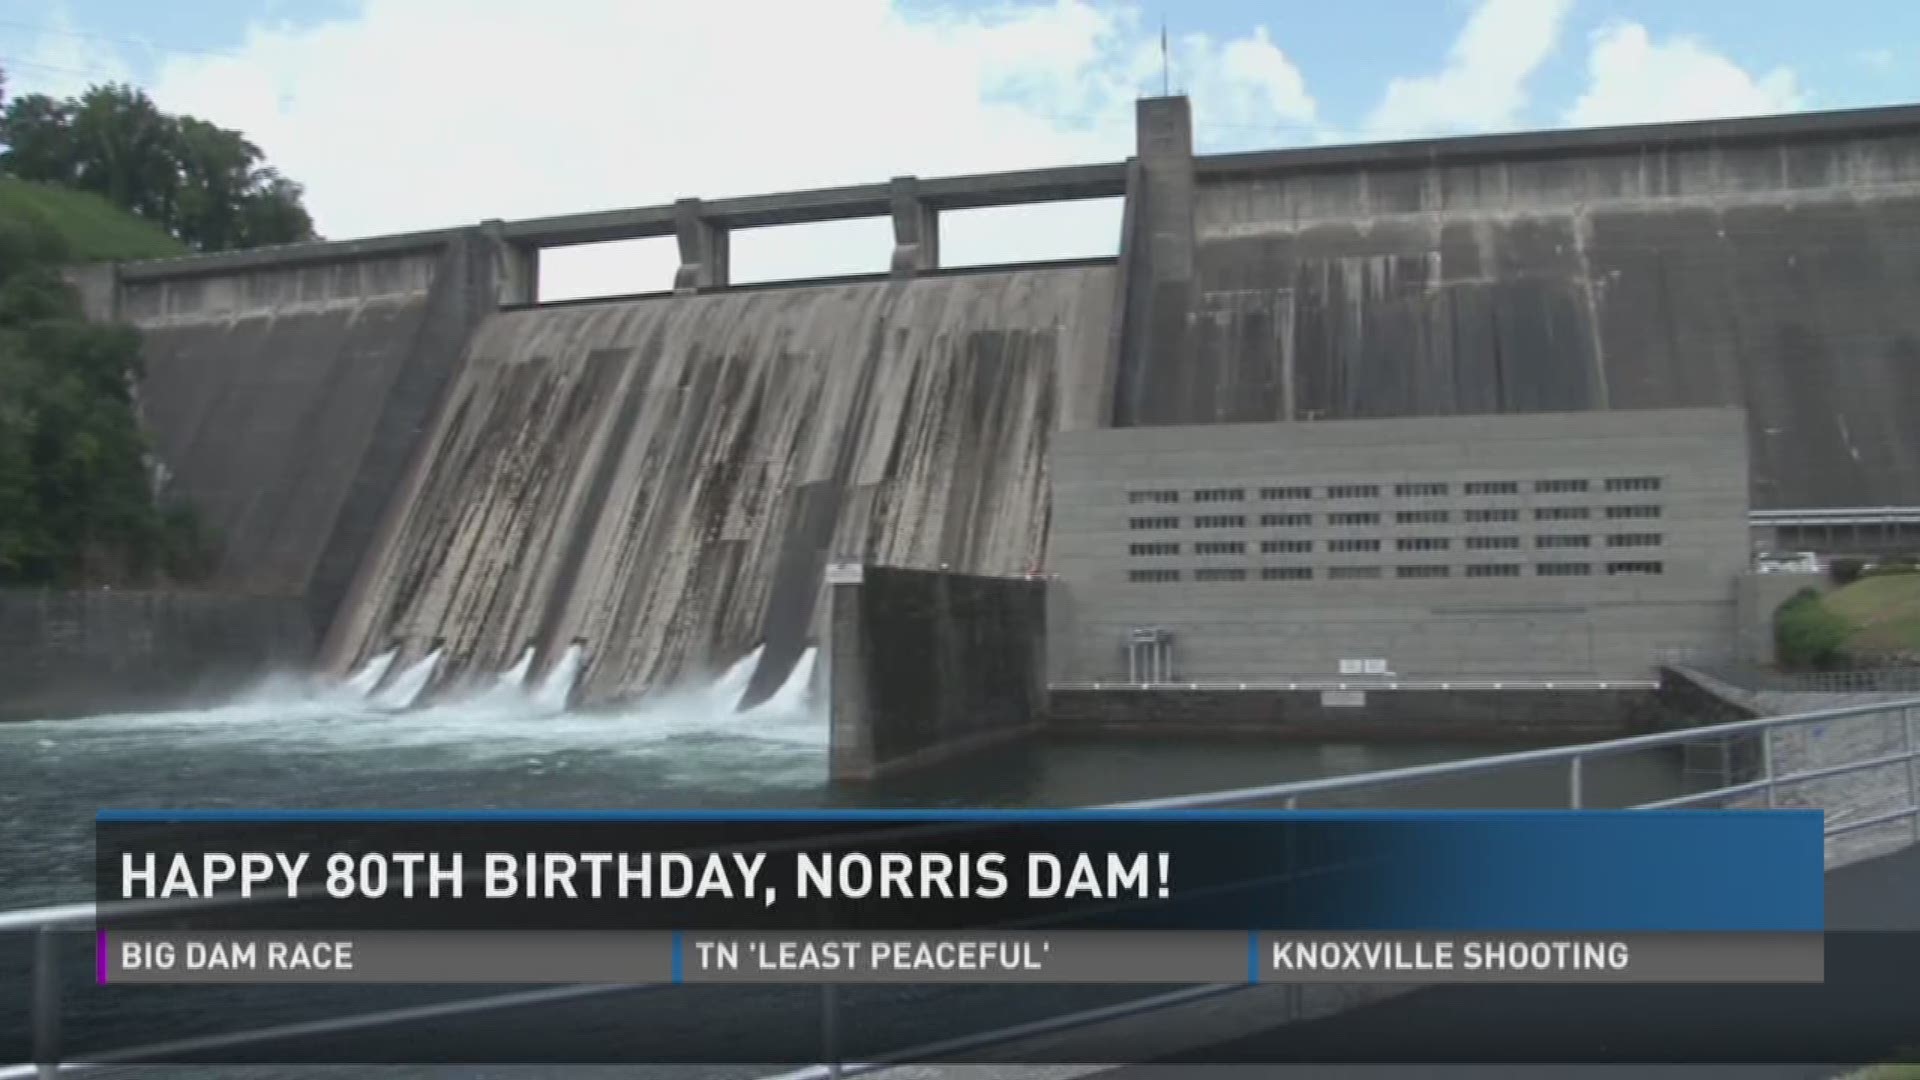 Norris Dam celebrates its 80th birthday by letting people tour the inside.